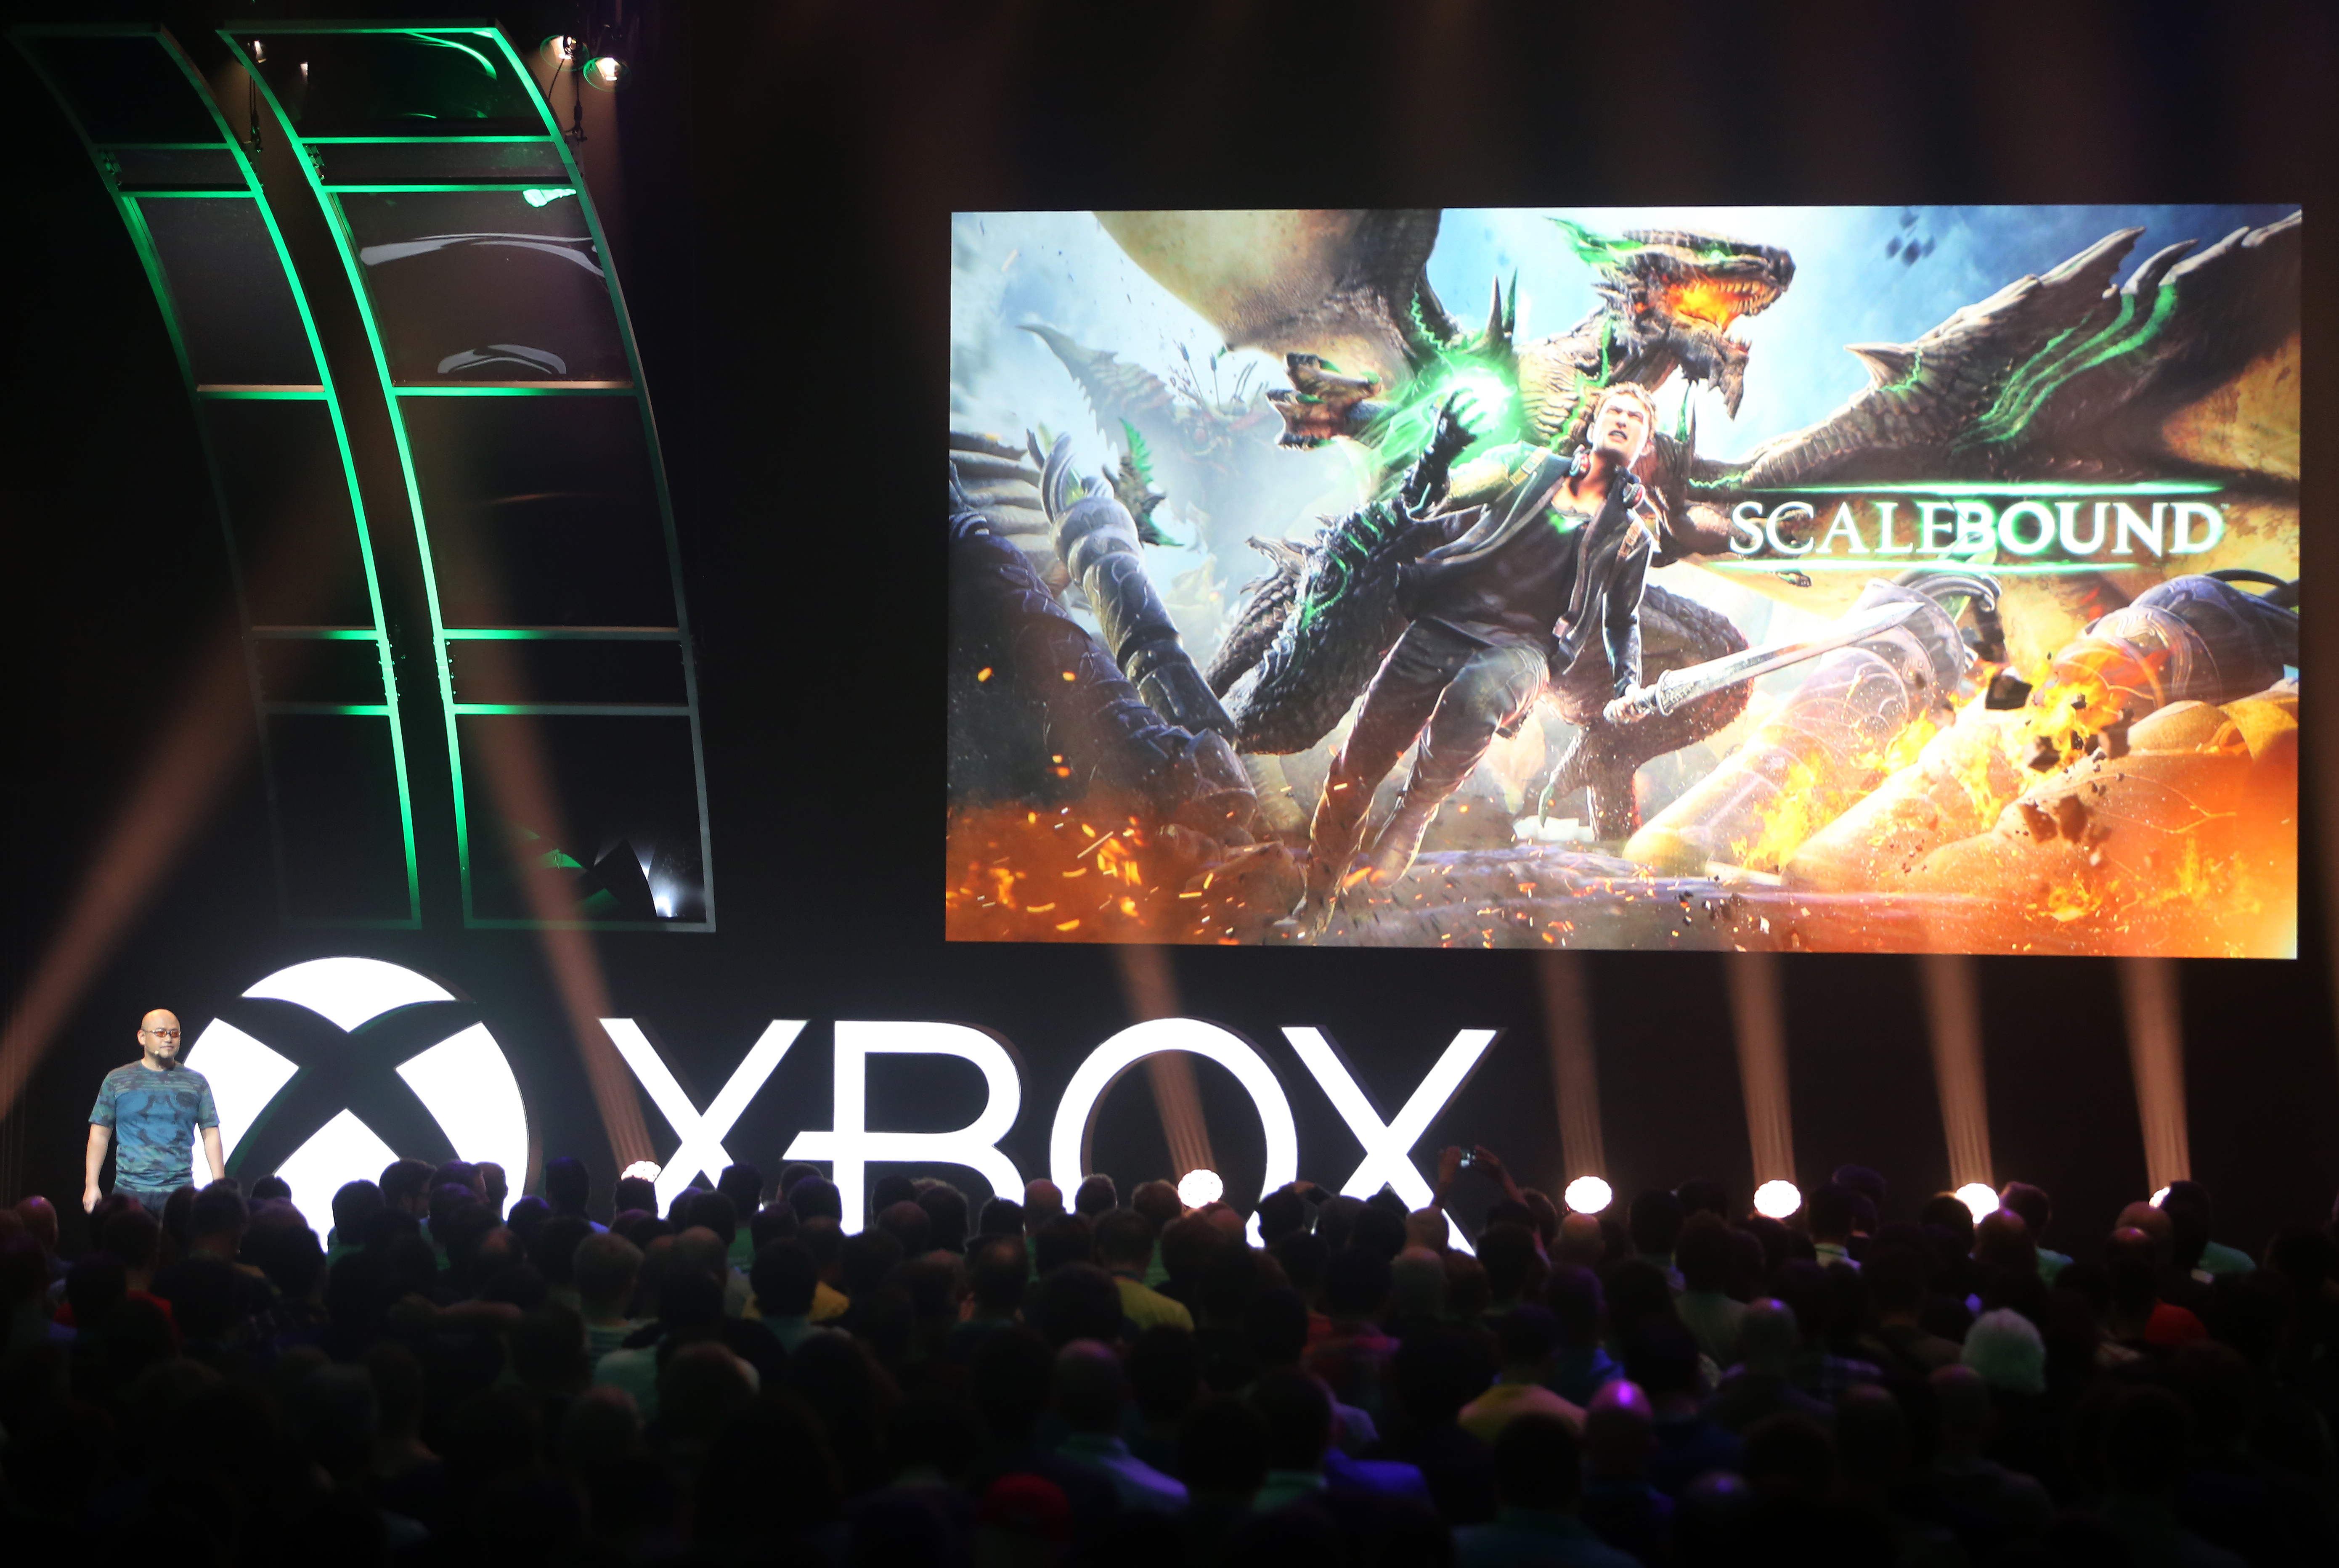 Hideki Kamiya, Game Director, PlatinumGames, at the Xbox gamescom 2015 Briefing on Tuesday, 4 August 2015 in Cologne, Germany. (Photo by Juergen Schwarz for Microsoft)